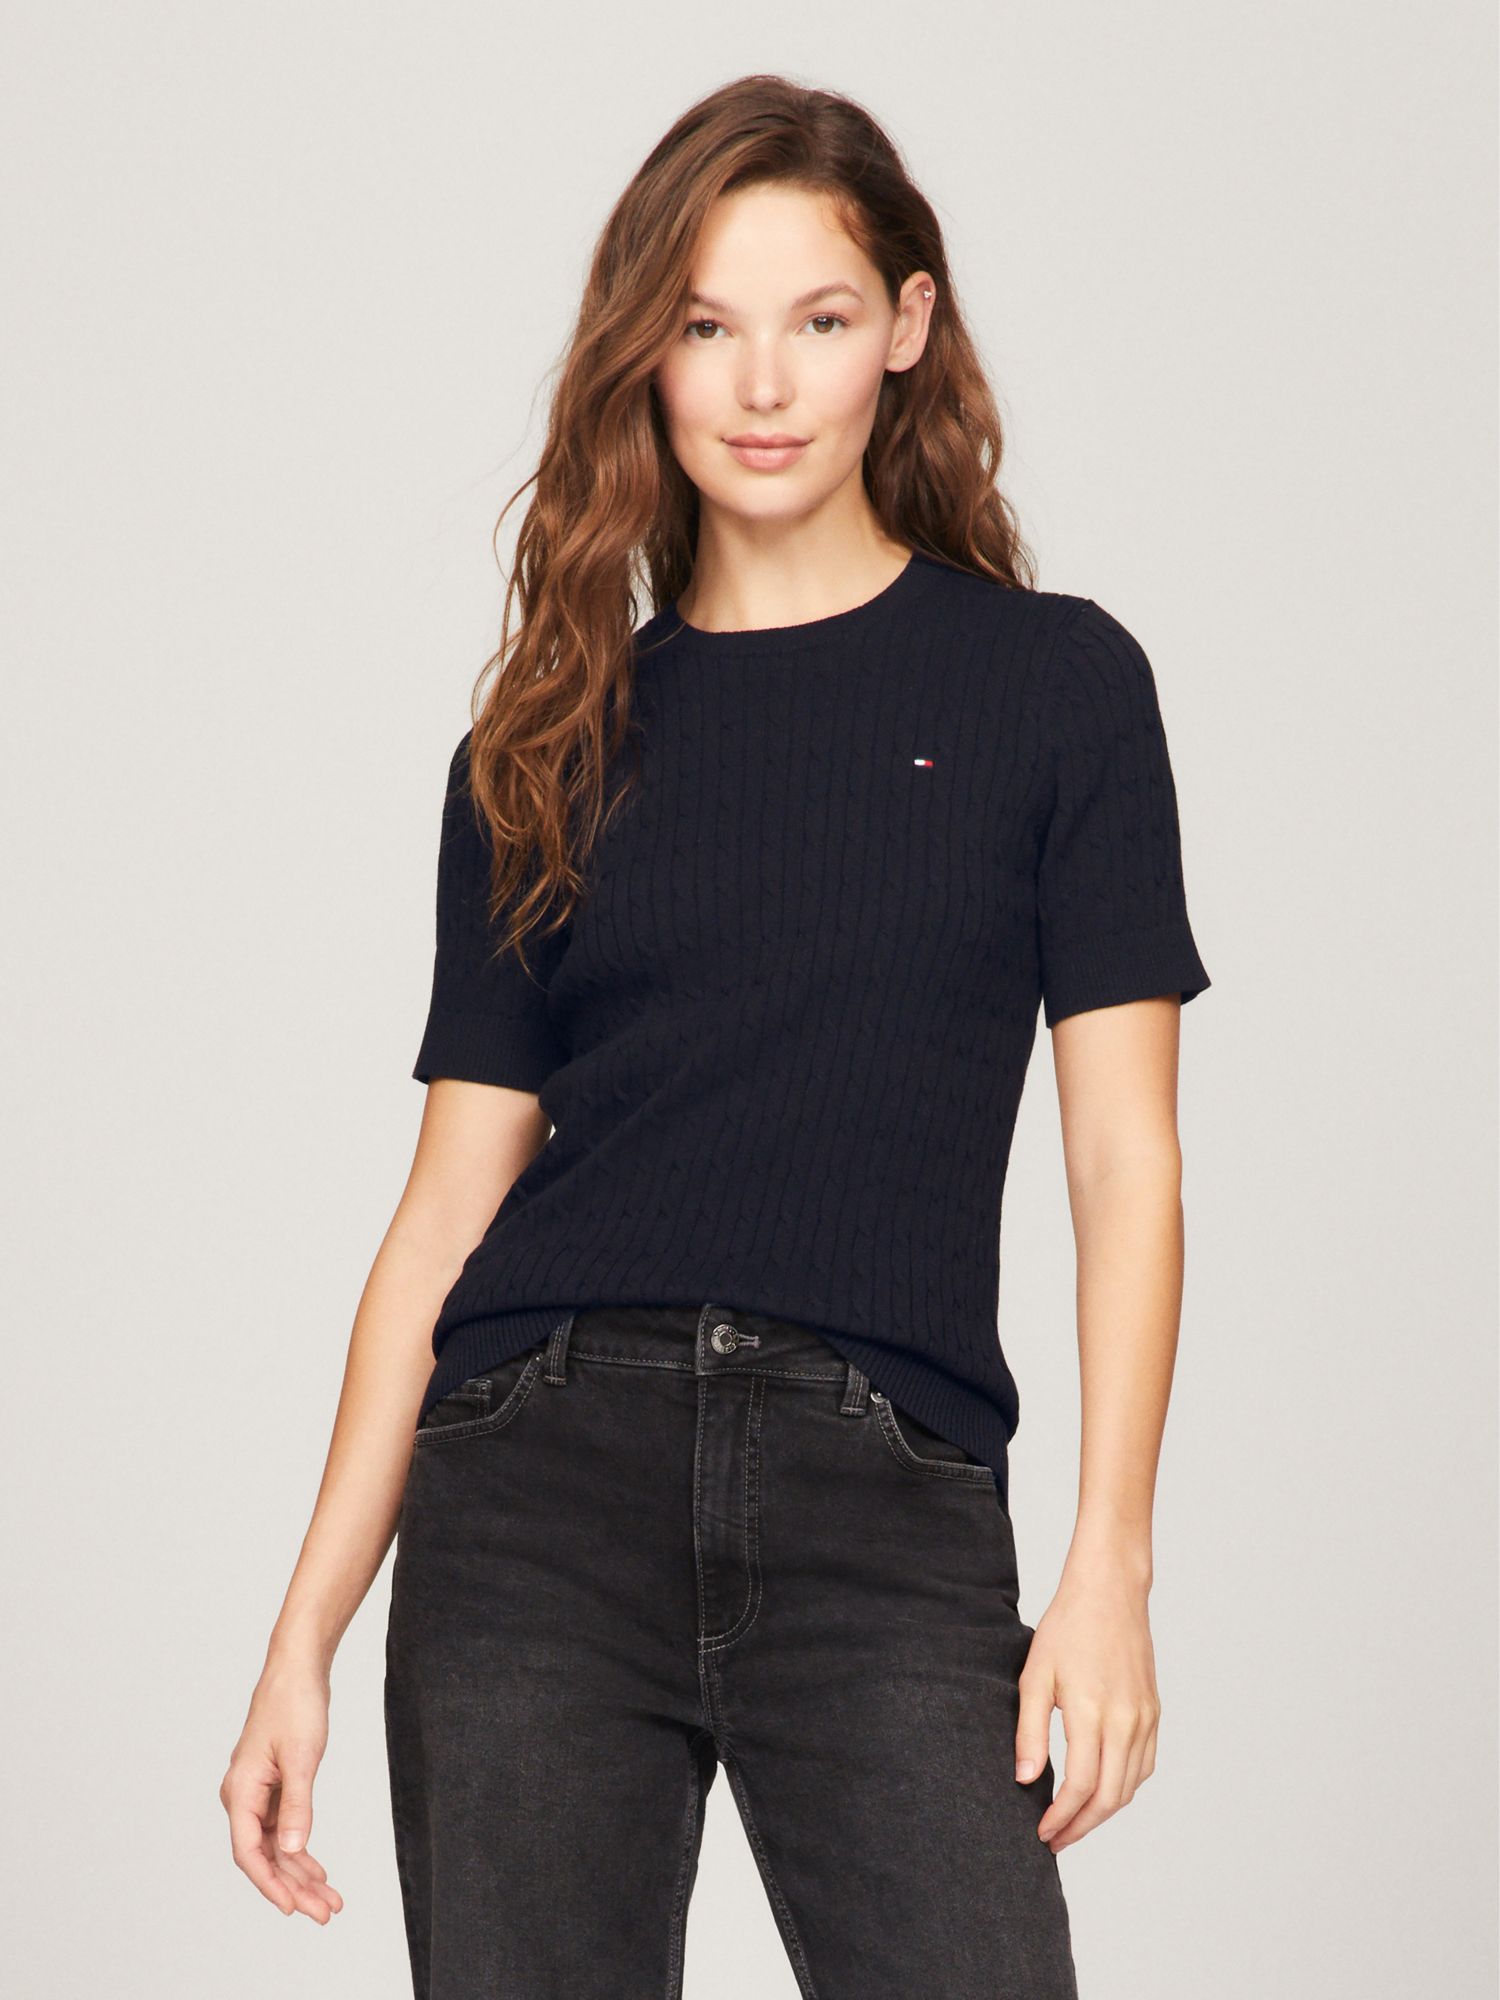 TOMMY HILFIGER Short-Sleeve Cable Knit Sweater